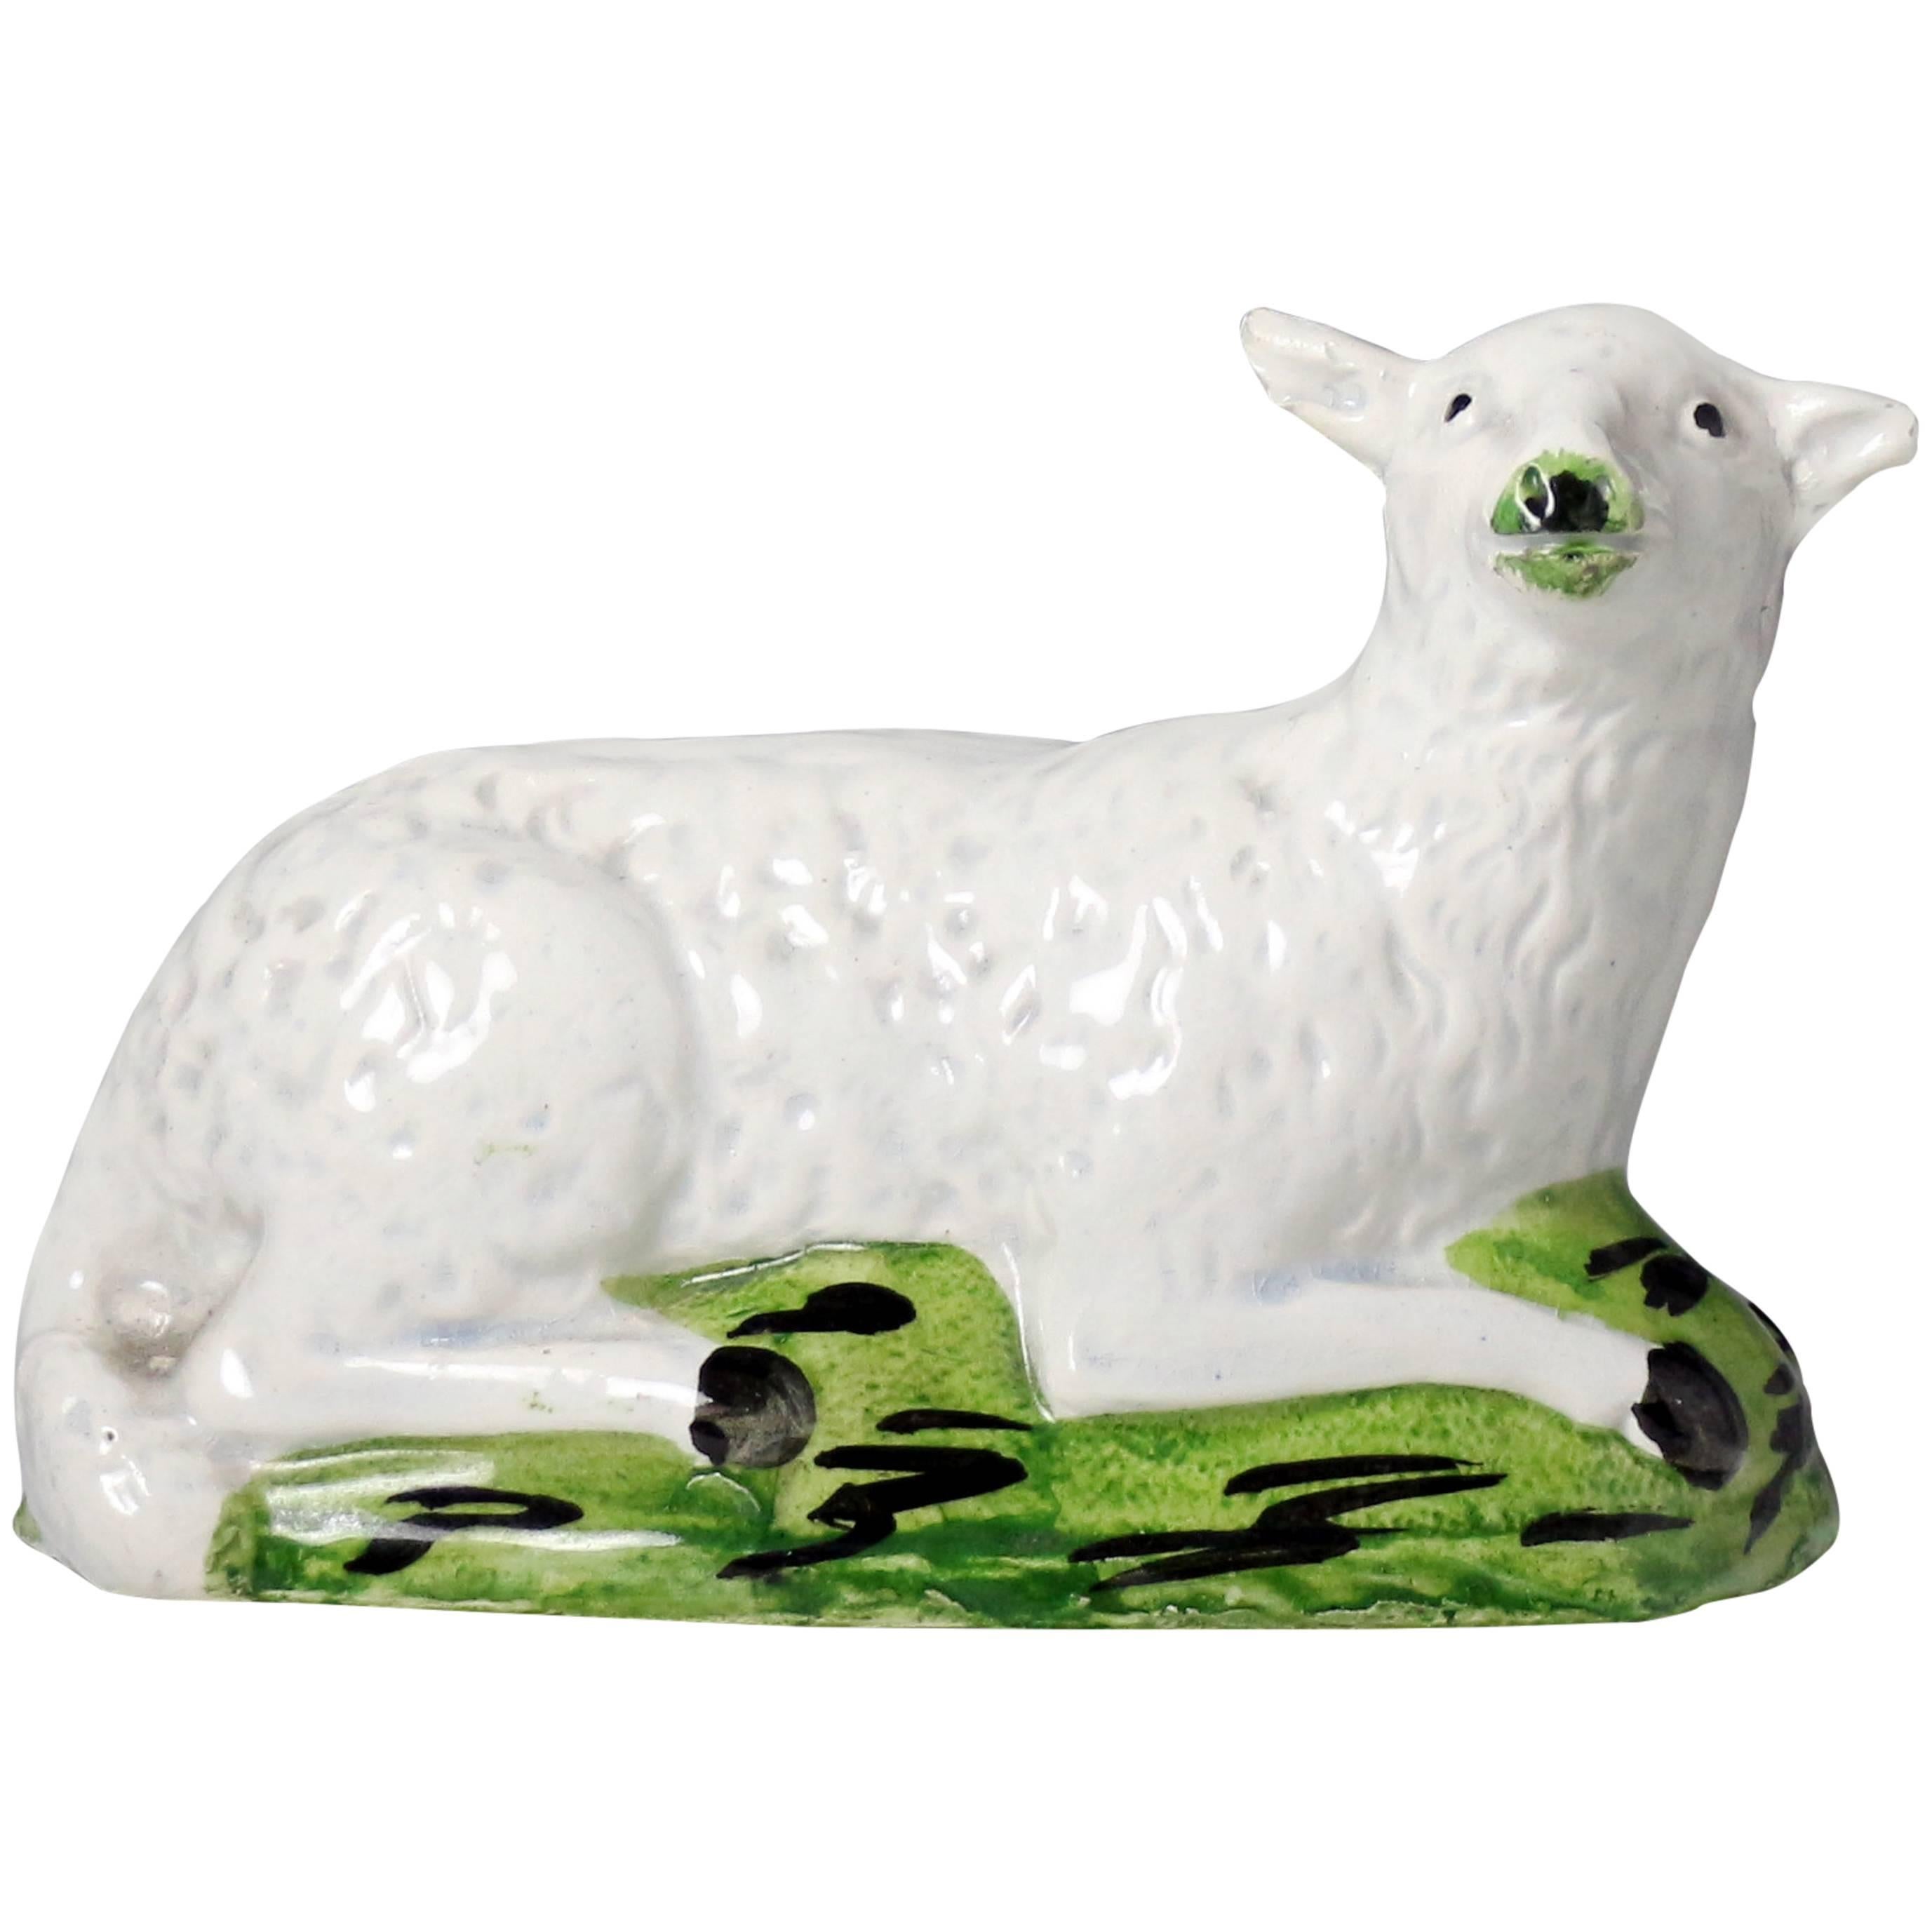 Antique English Pottery of a Ewe in a Green Base, Early 19th Century